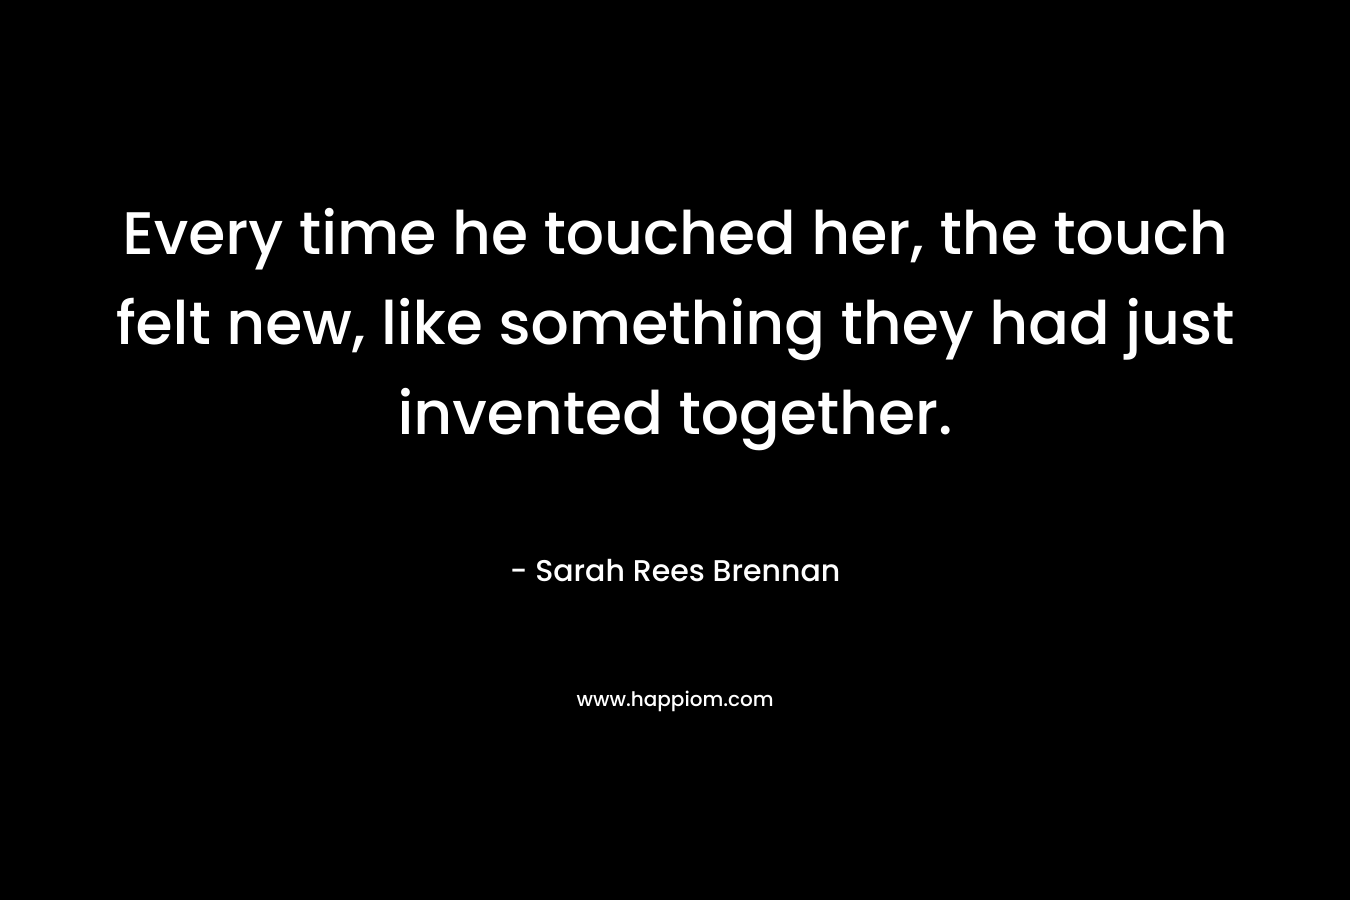 Every time he touched her, the touch felt new, like something they had just invented together.